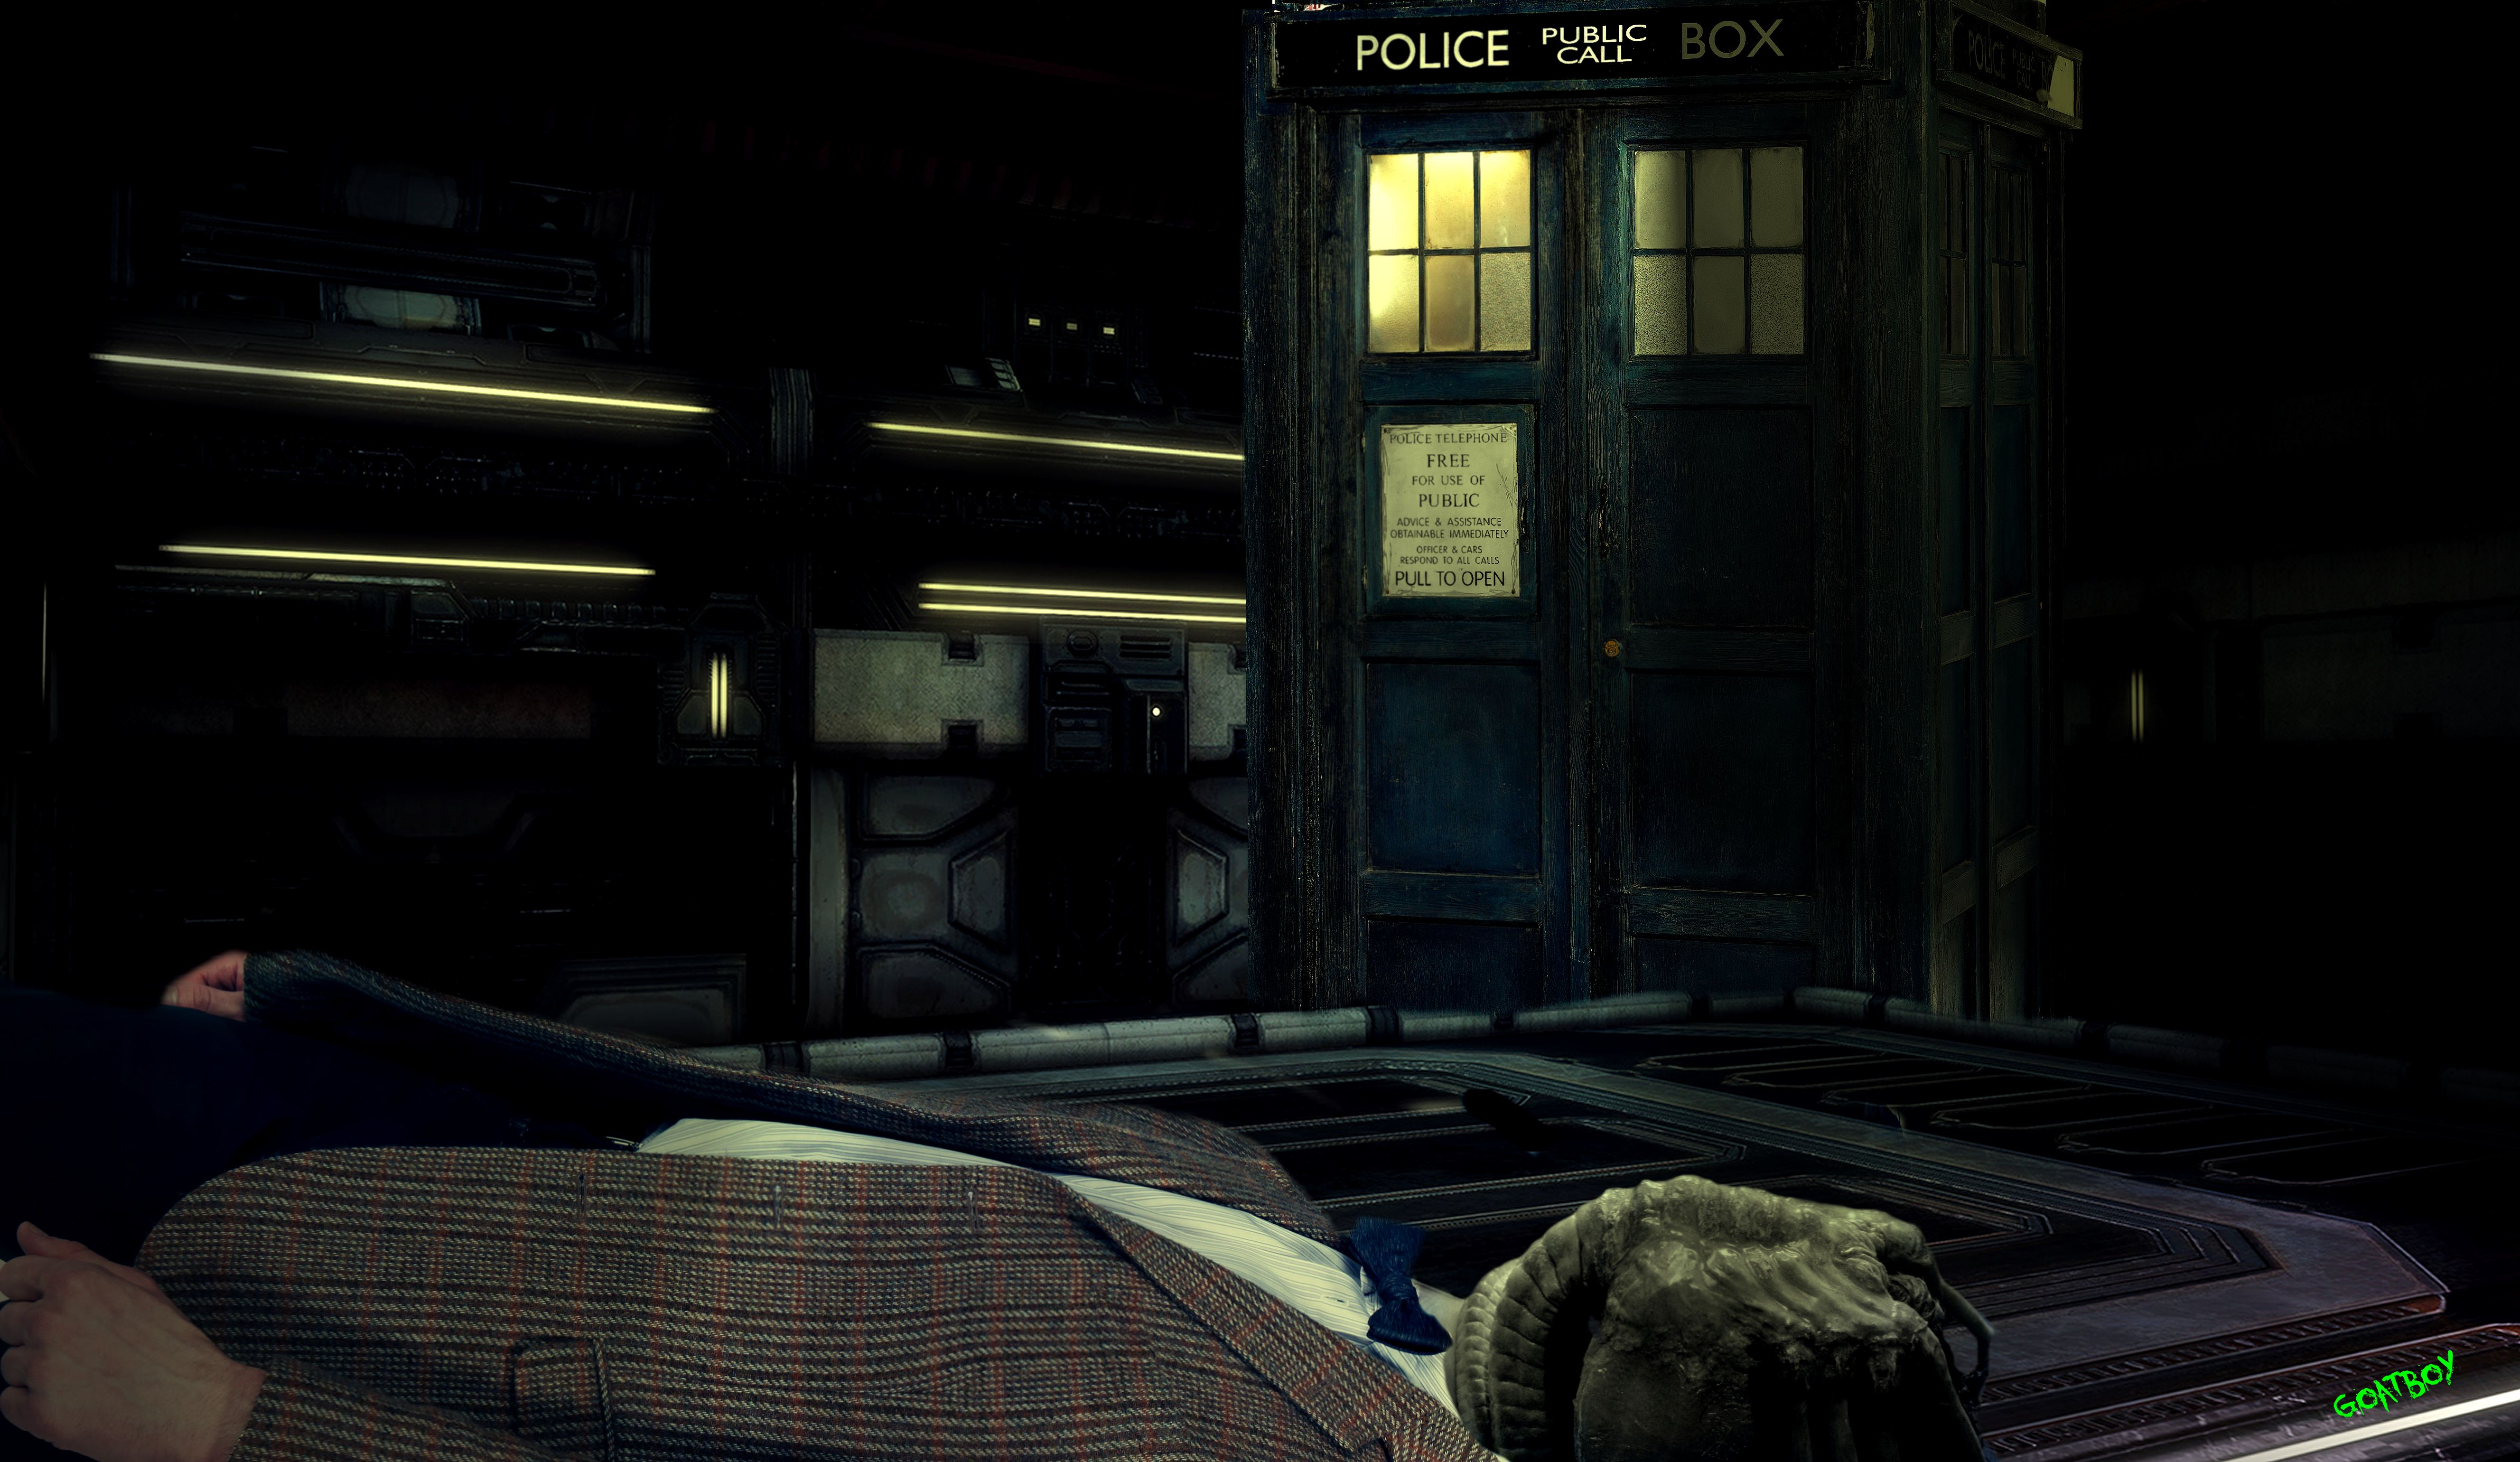 http://themoriartyofgore.files.wordpress.com/2013/04/doctor-who-alien.png